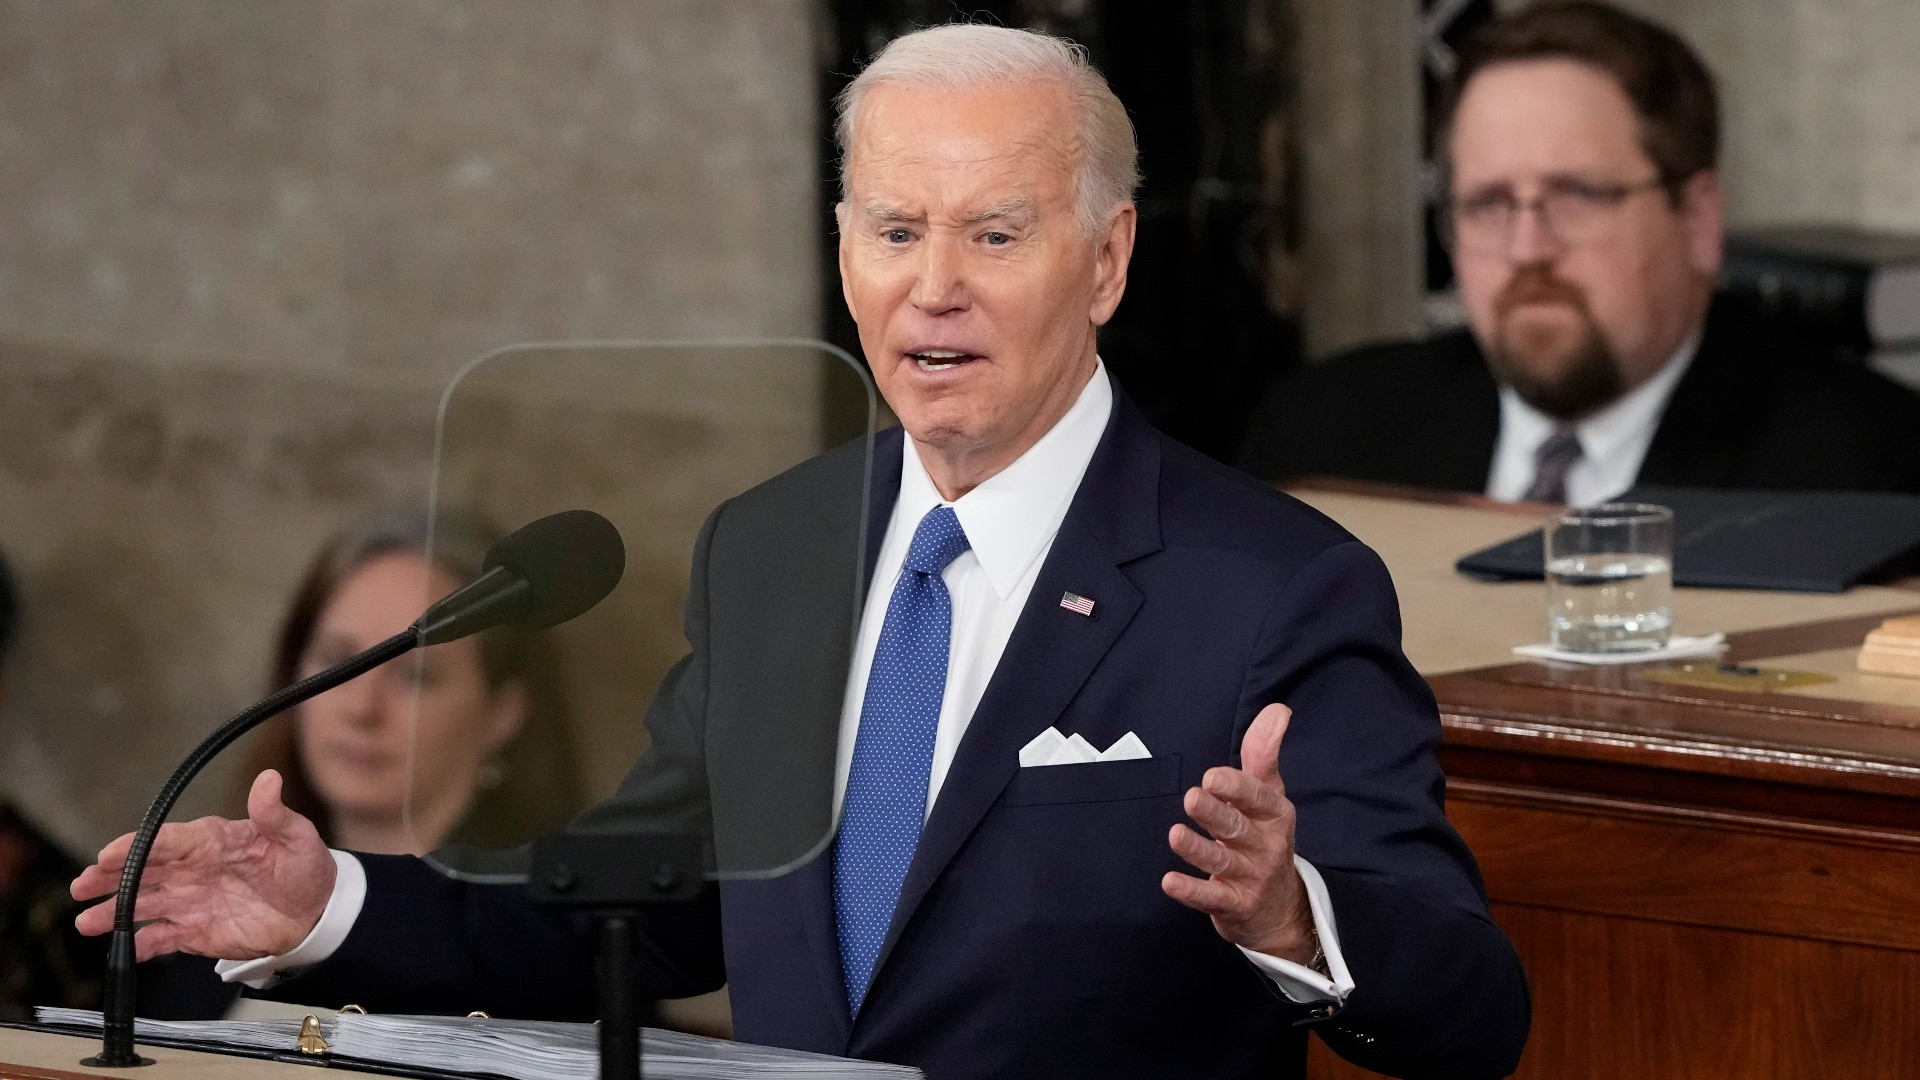 Throughout his speech, Biden sought to portray a nation dramatically different in positive ways from the one he took charge of two years ago.